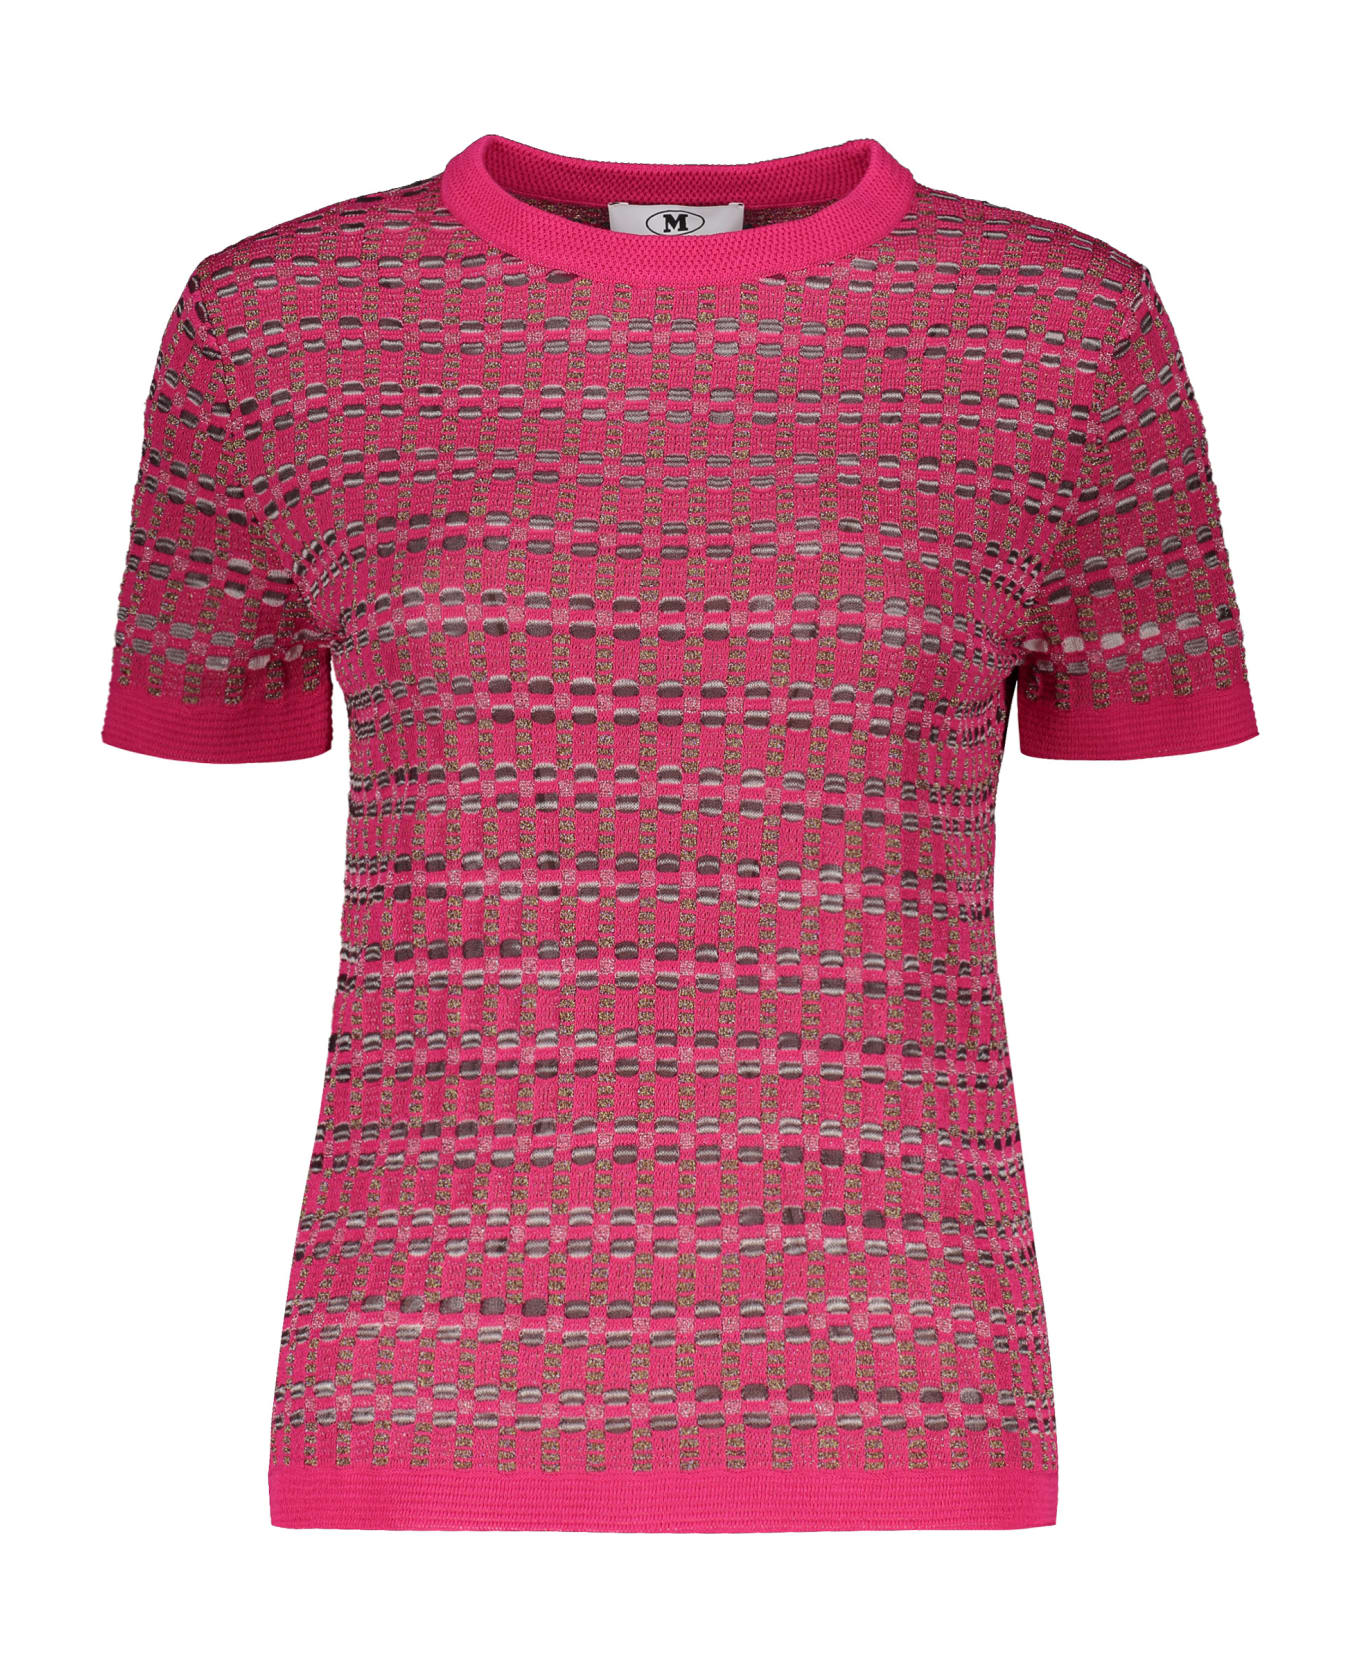 M Missoni Knitted Viscosa-blend Top - Pink